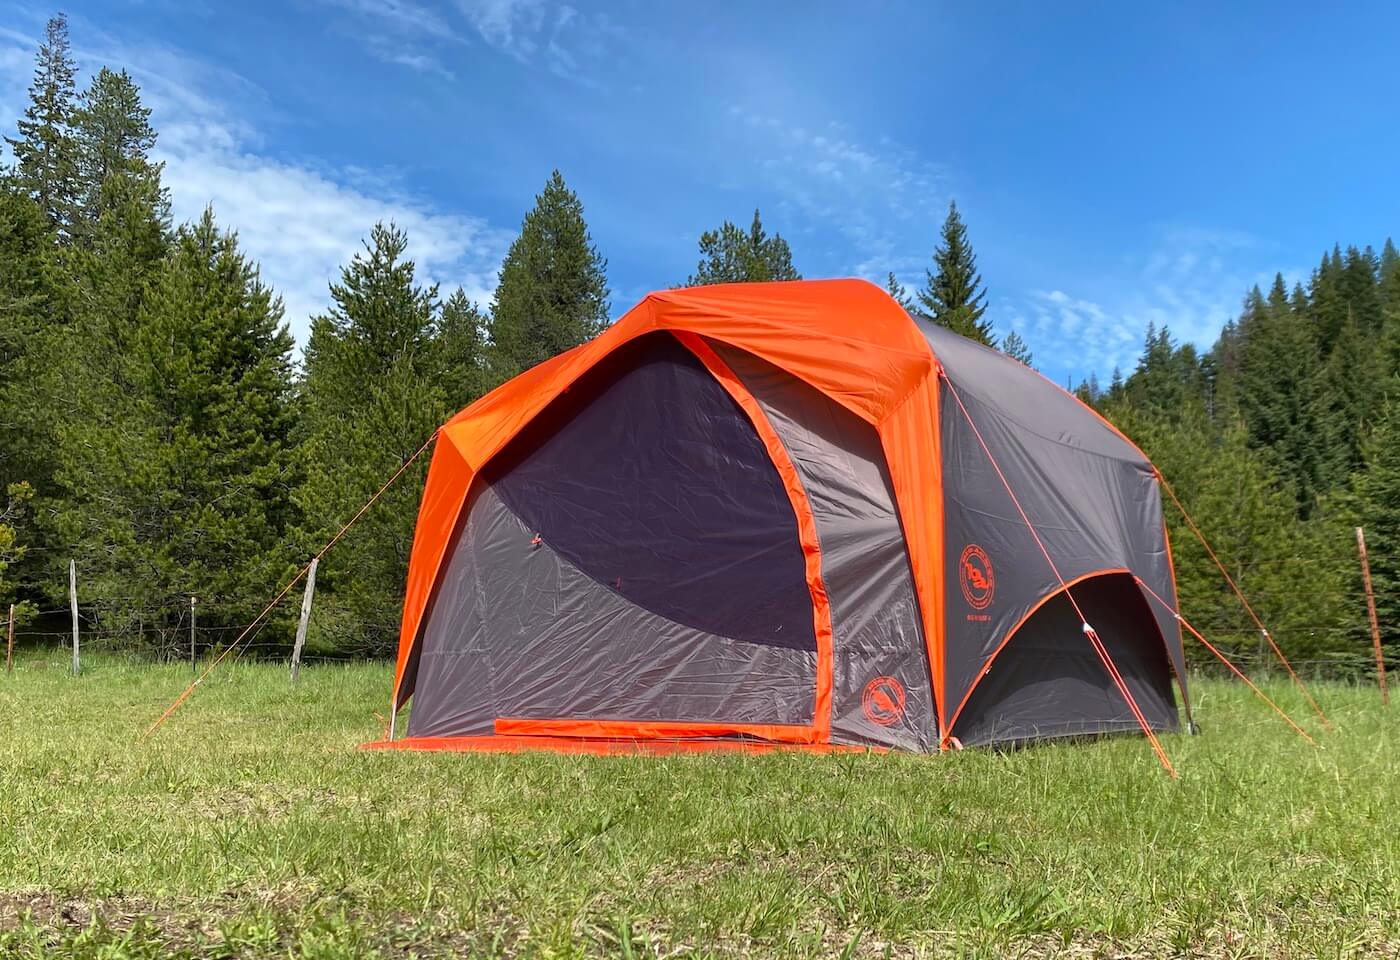 Big Agnes Big House Tent Review: 'It All Adds Up' - Man Makes Fire